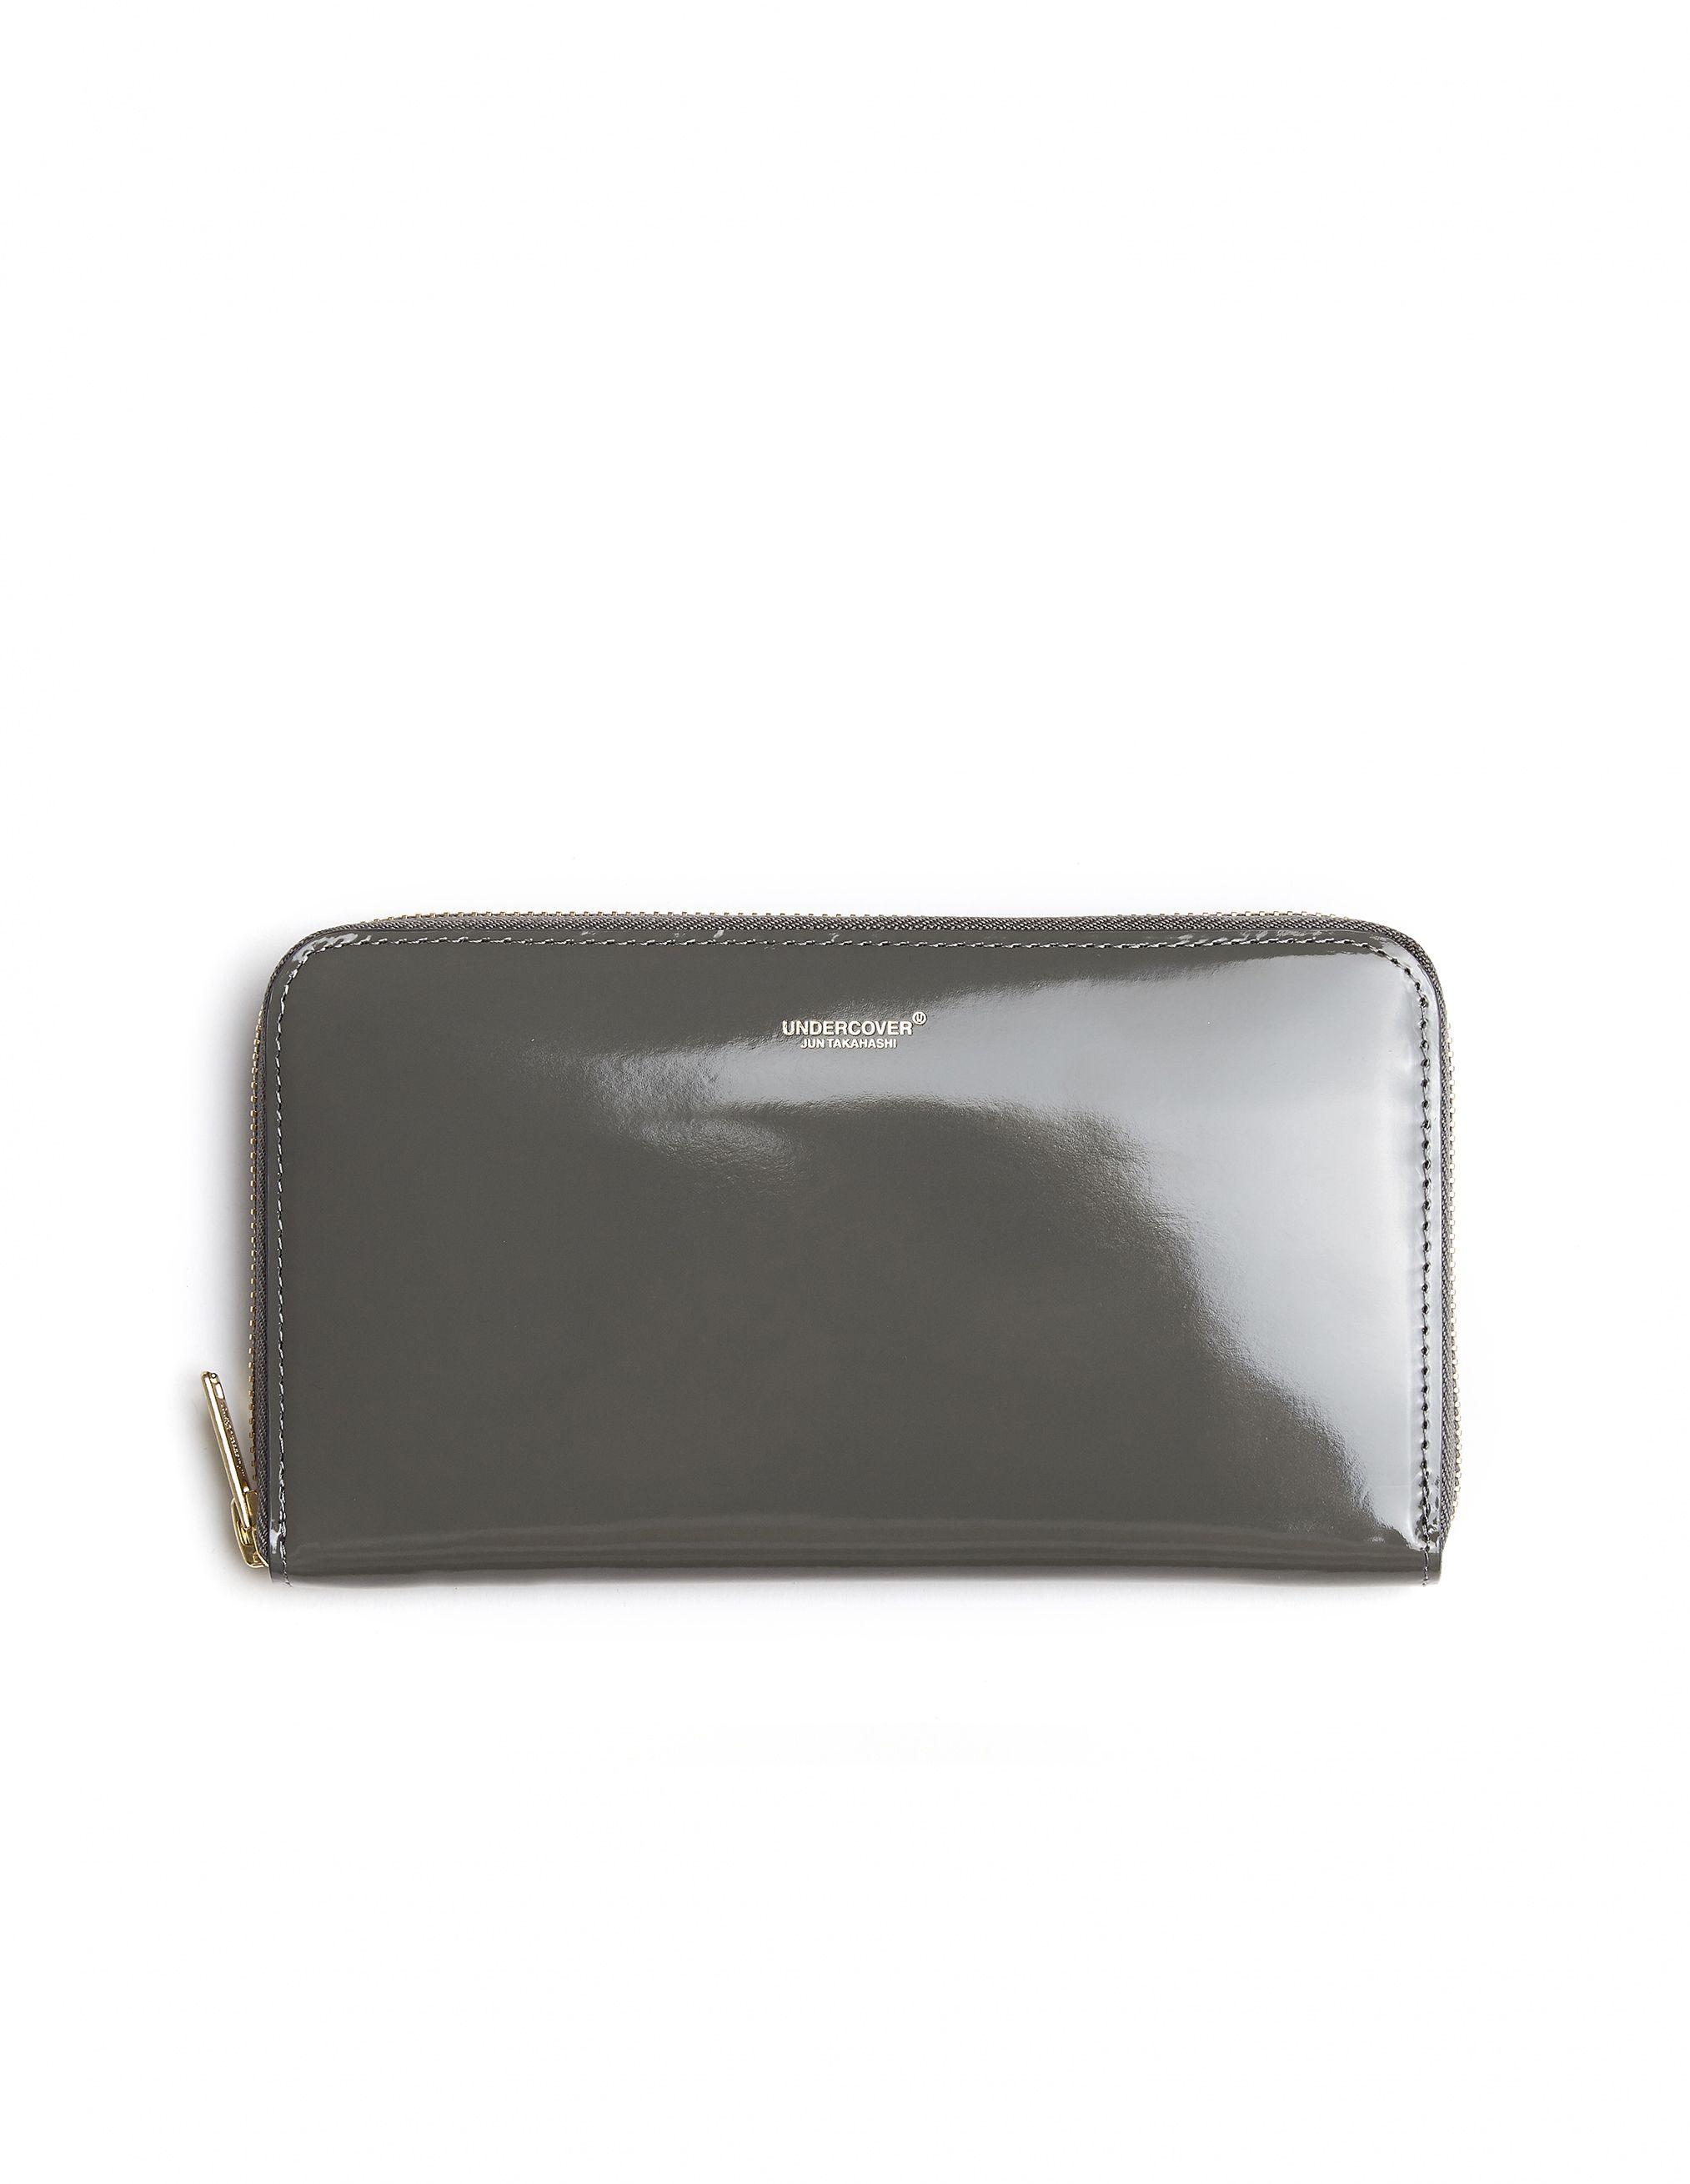 Undercover Brand Logo - Undercover. Leather Logo Wallet